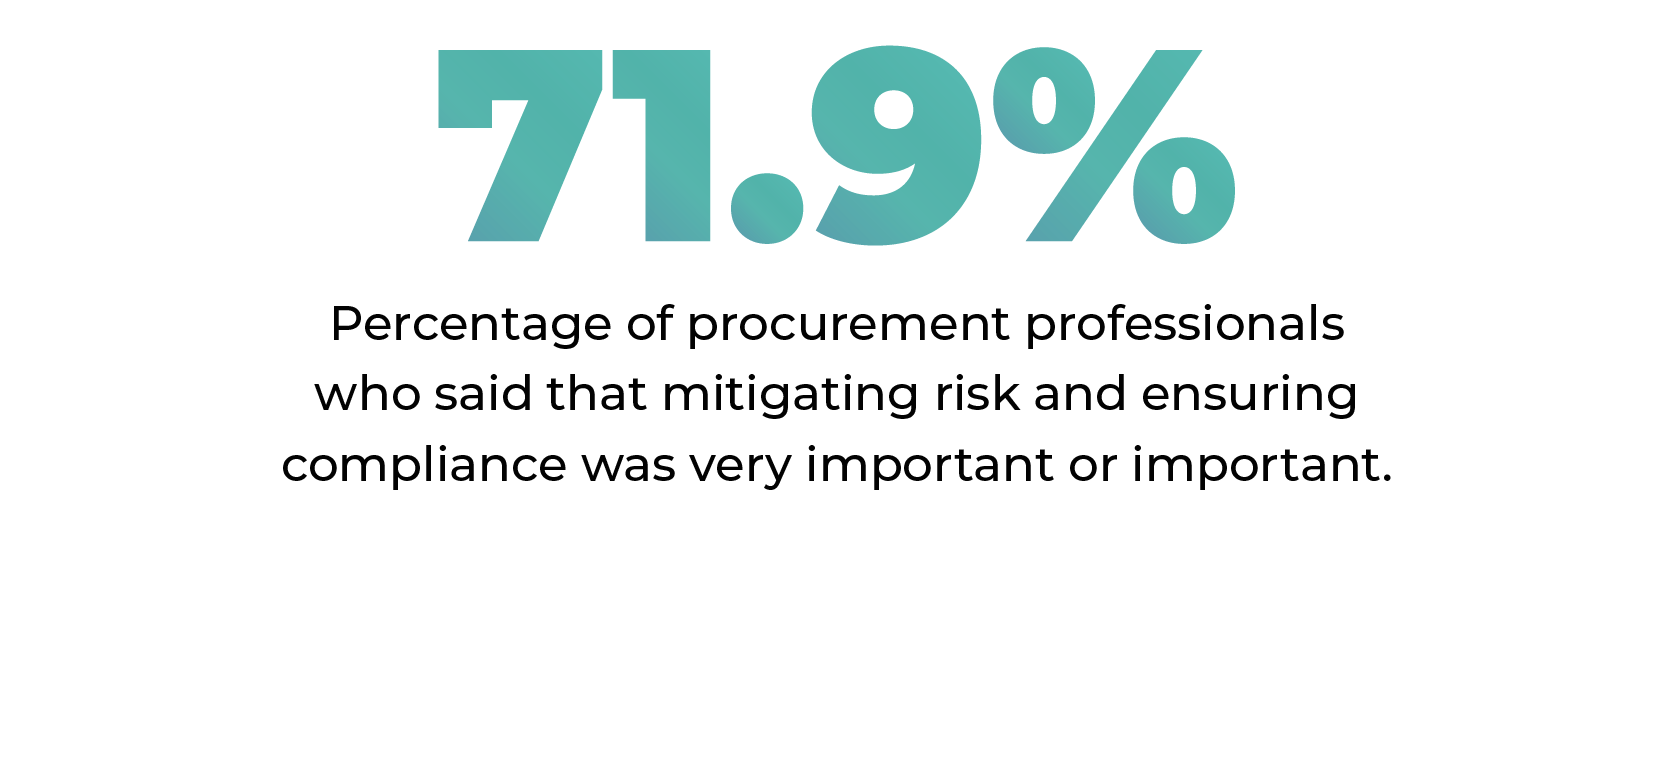 Percentage of procurement professionals who said that mitigating risk and ensuring compliance was very important or important.